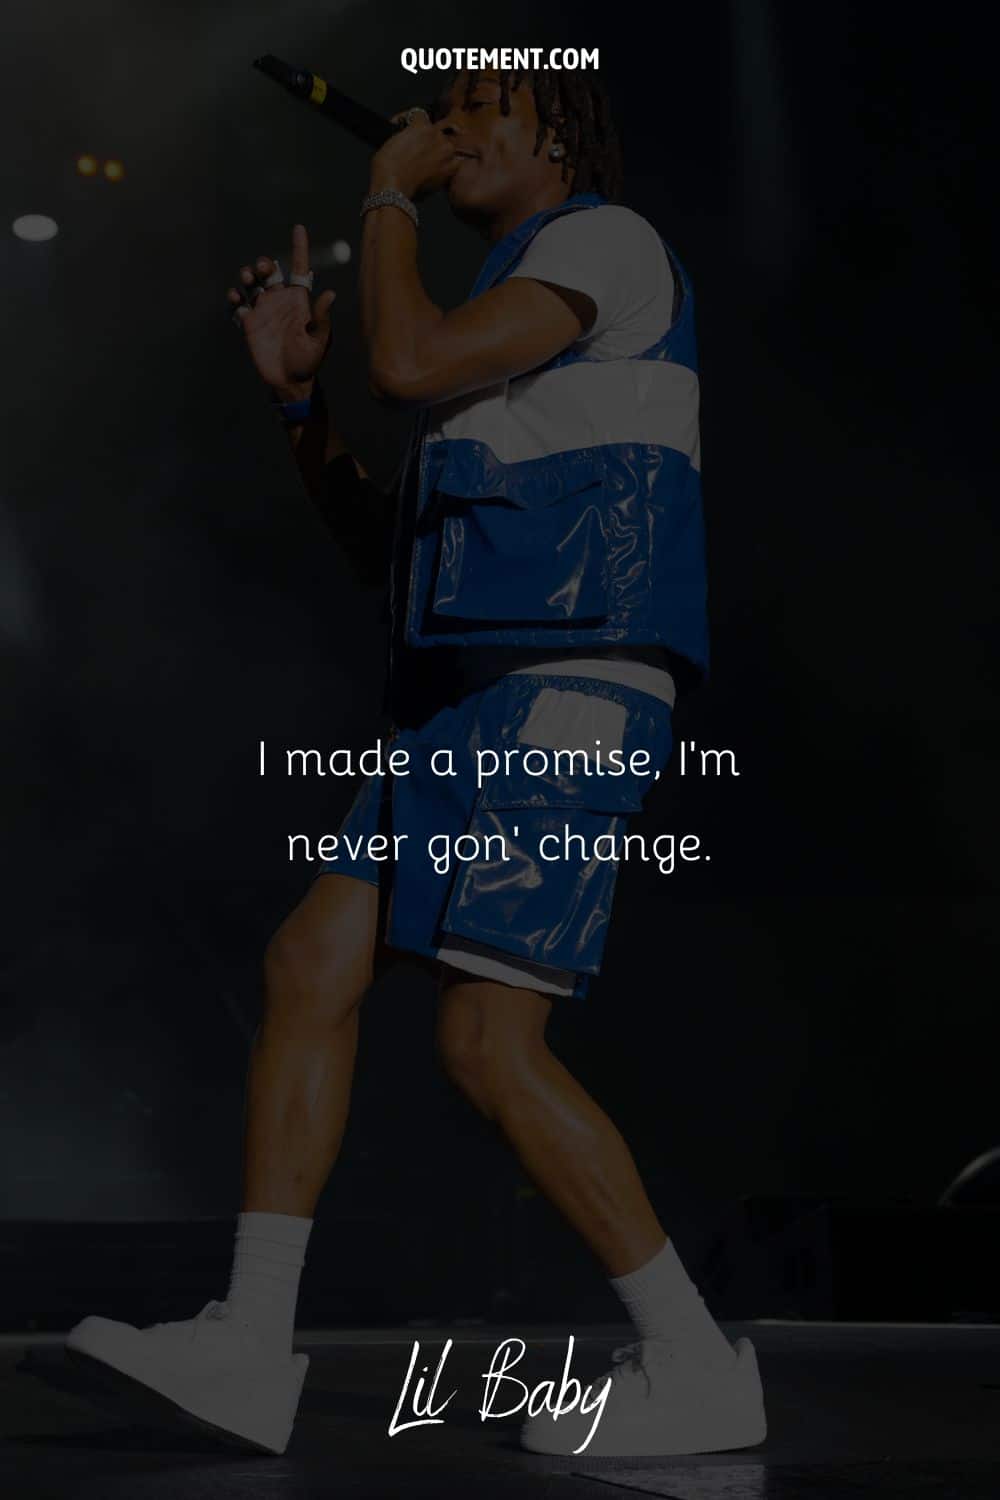 rapper image representing lil baby lyric quote